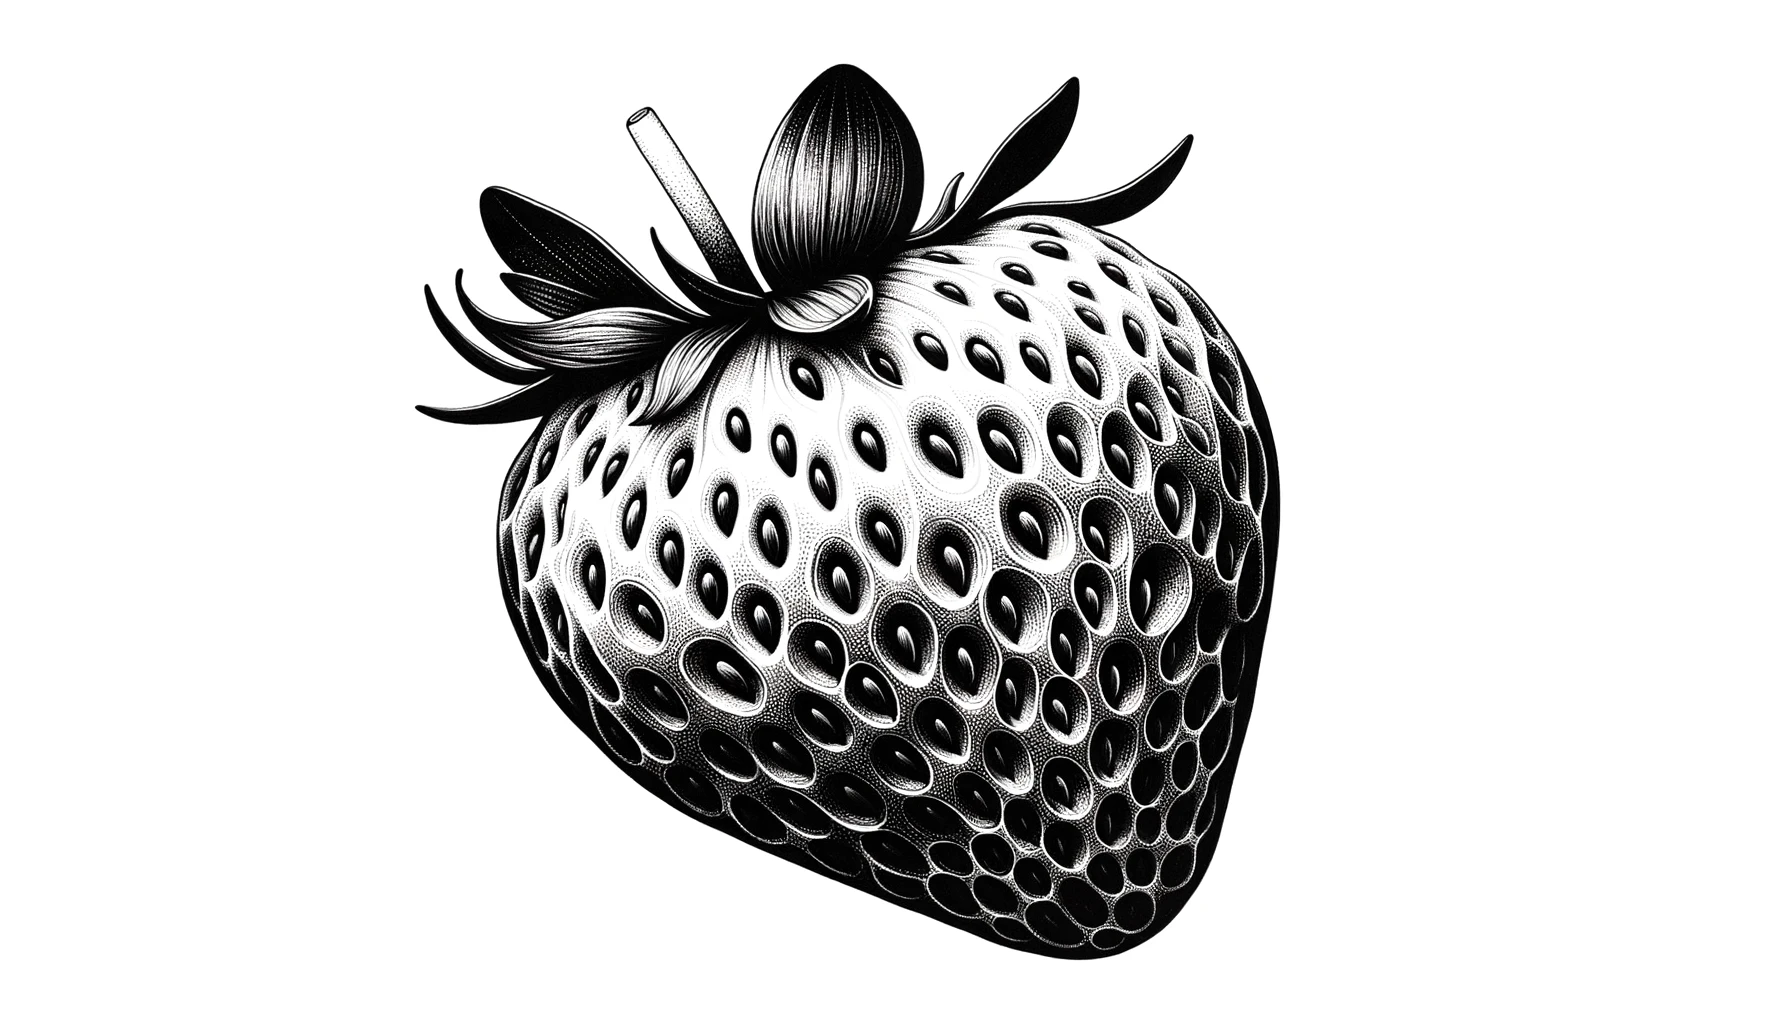 How to draw a strawberry: A step-by-step guide